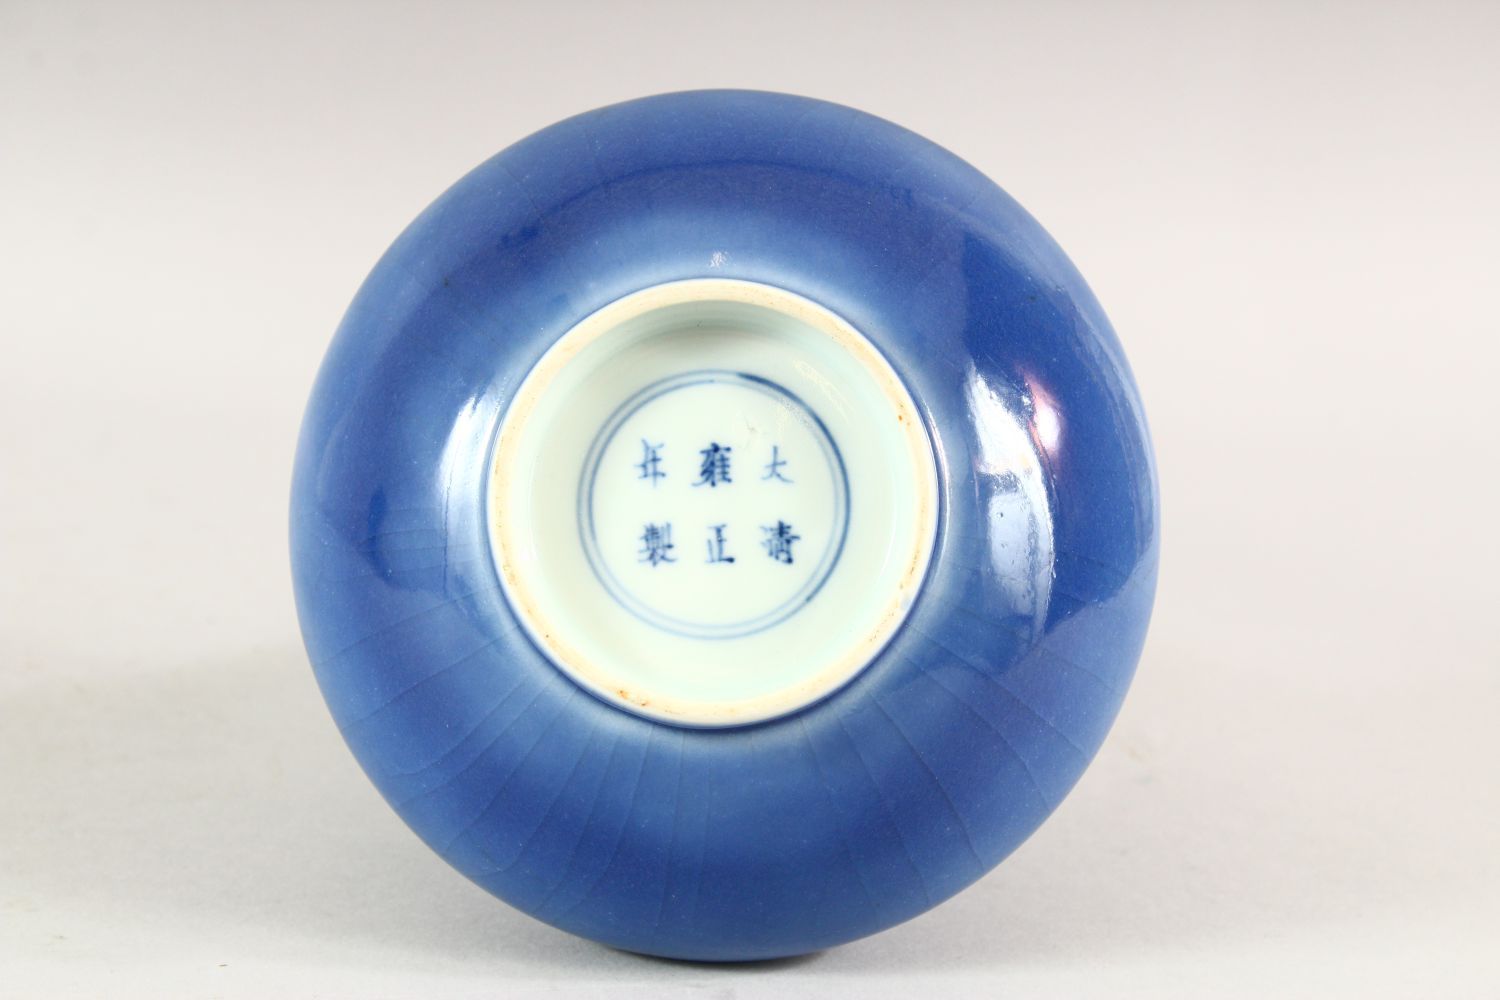 A GOOD BLUE GLAZE BULBOUS VASE, six character mark to base in blue, 22cm high. - Image 5 of 6